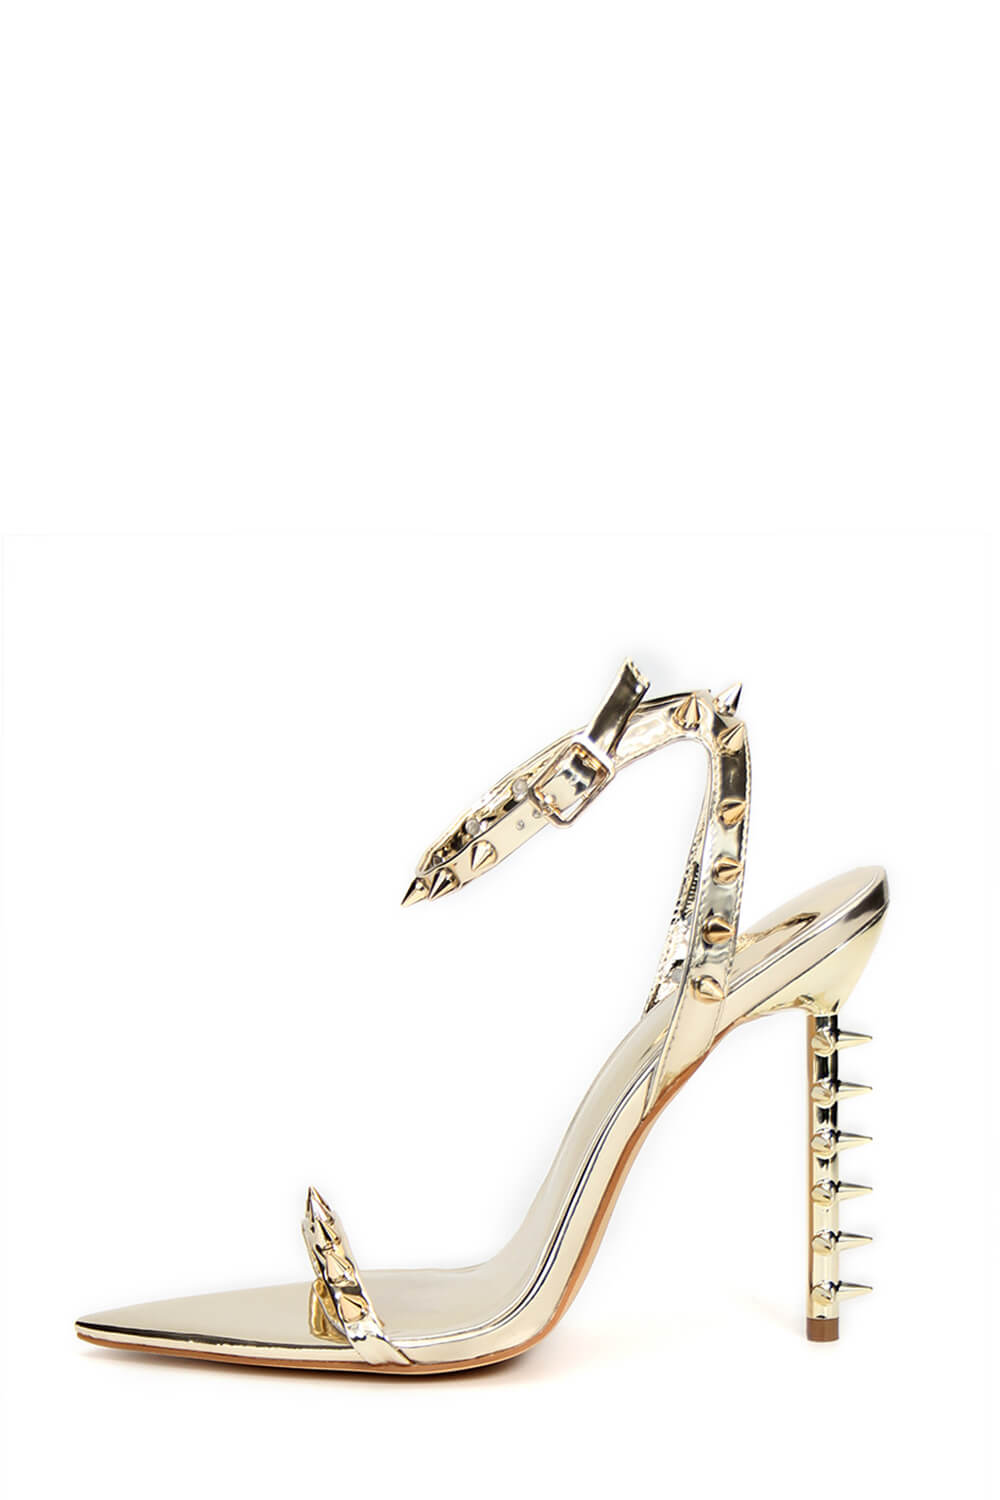 Spiked Studs Open Pointed Toe Stiletto Heeled Ankle Sandals - Gold